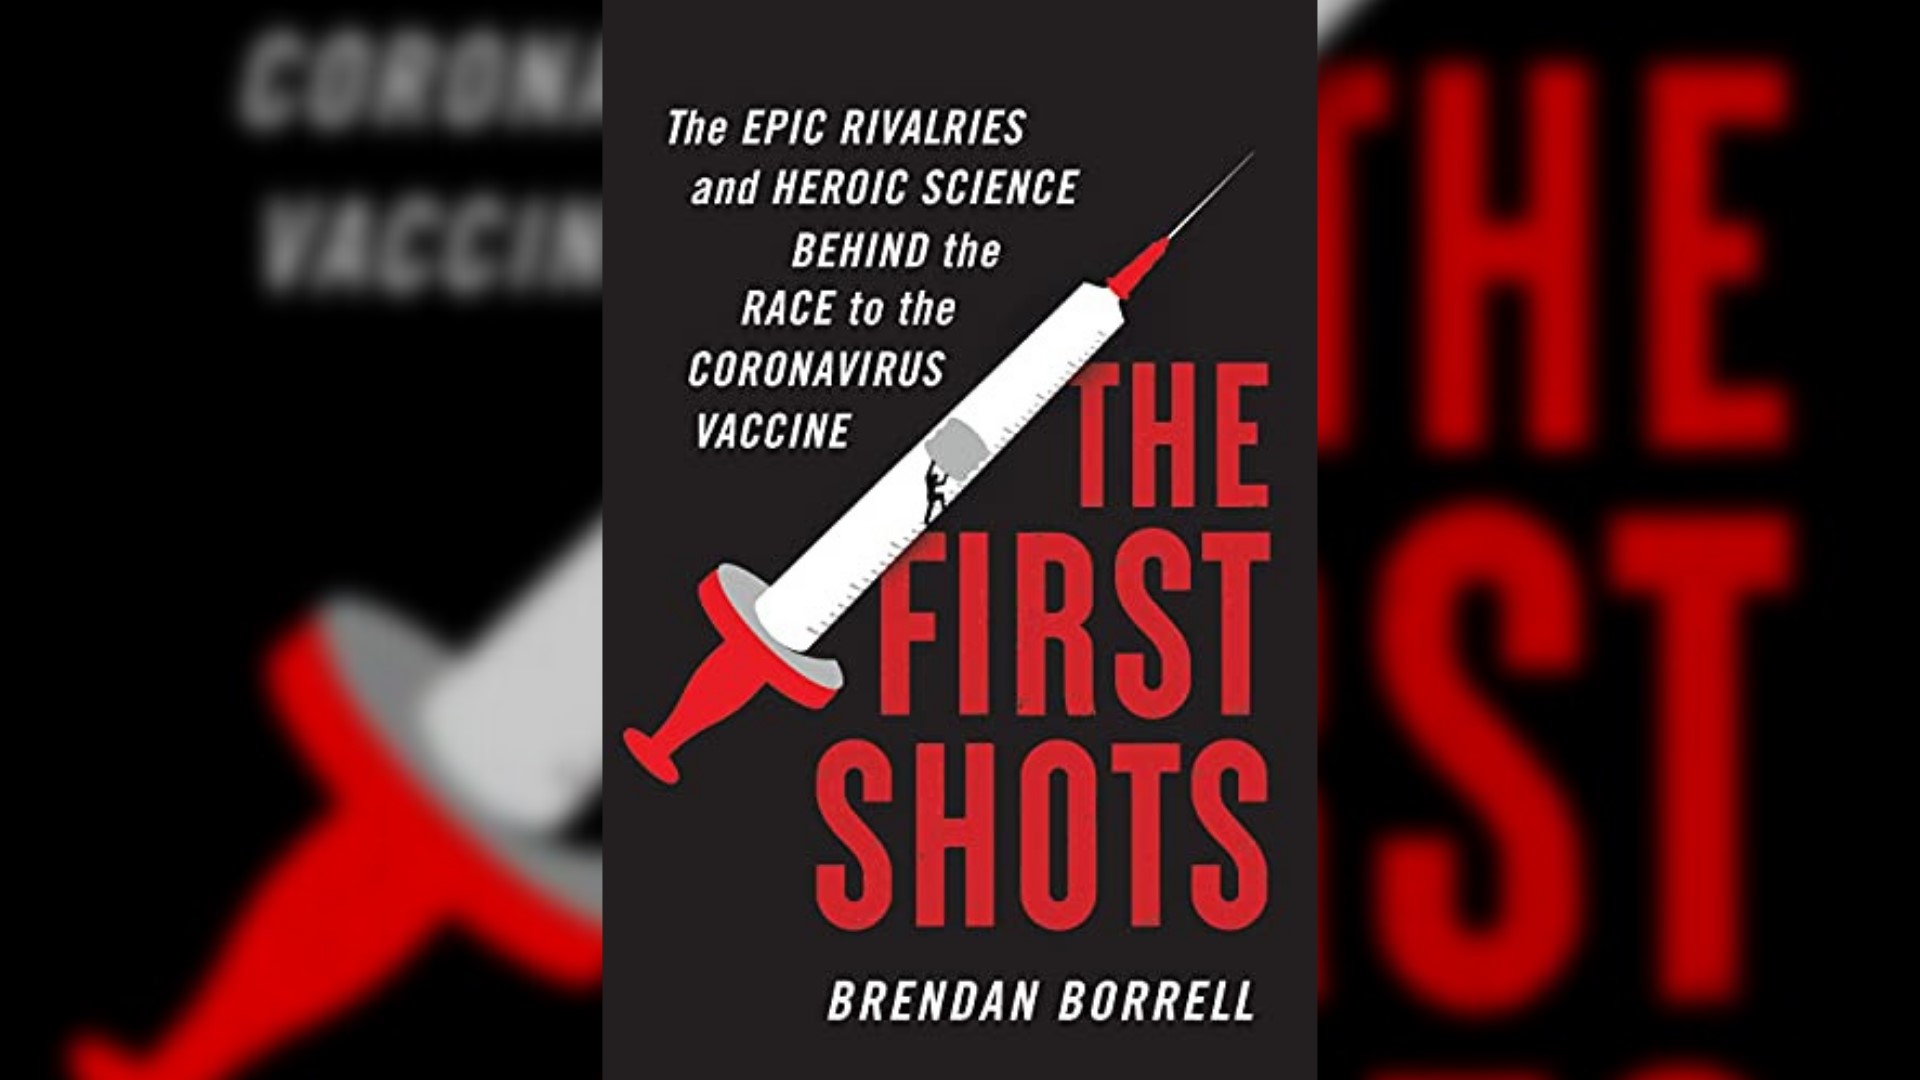 "The First Shots" is a new book that reflects on the achievements of Operation Warp Speed and the scientific heroes of the rapidly-developed vaccine. #newdaynw